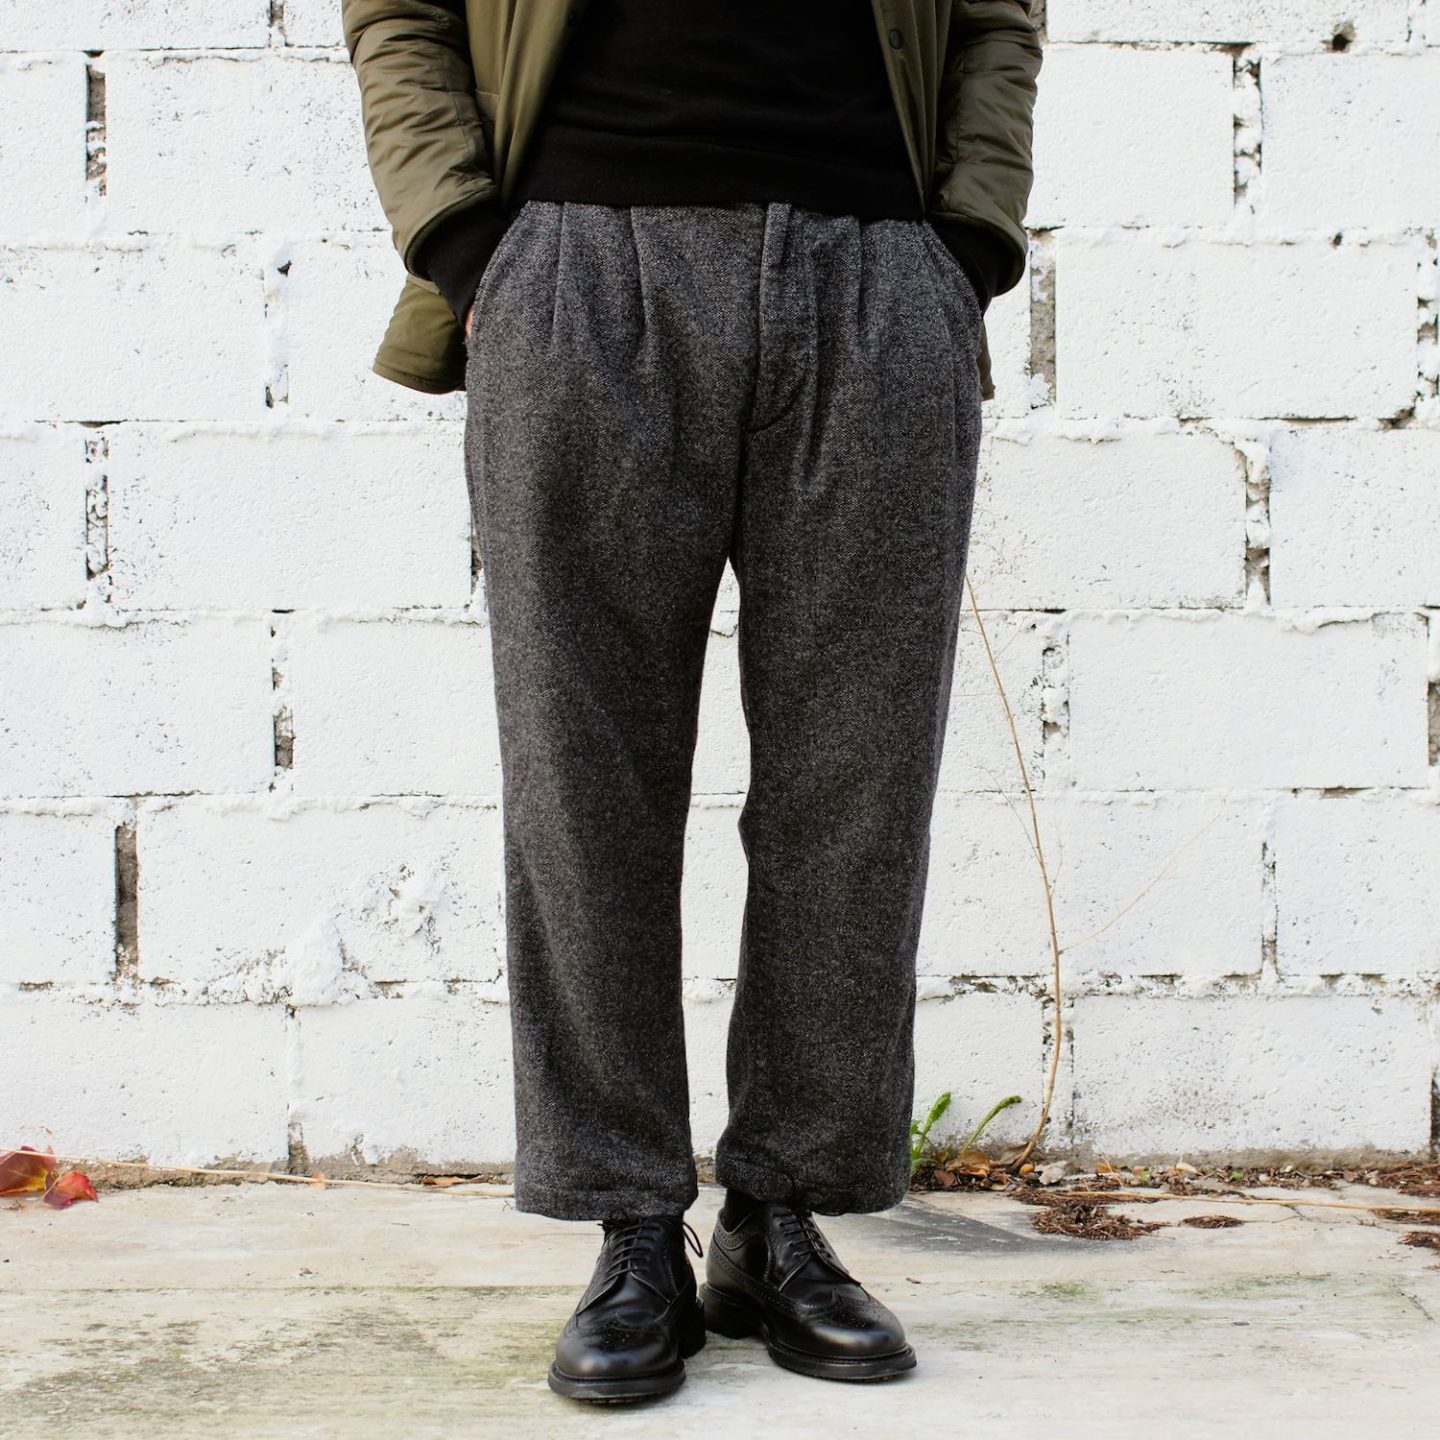 engineered garments pleated pants emerson wool homespun et longwing brogues maw sauveur